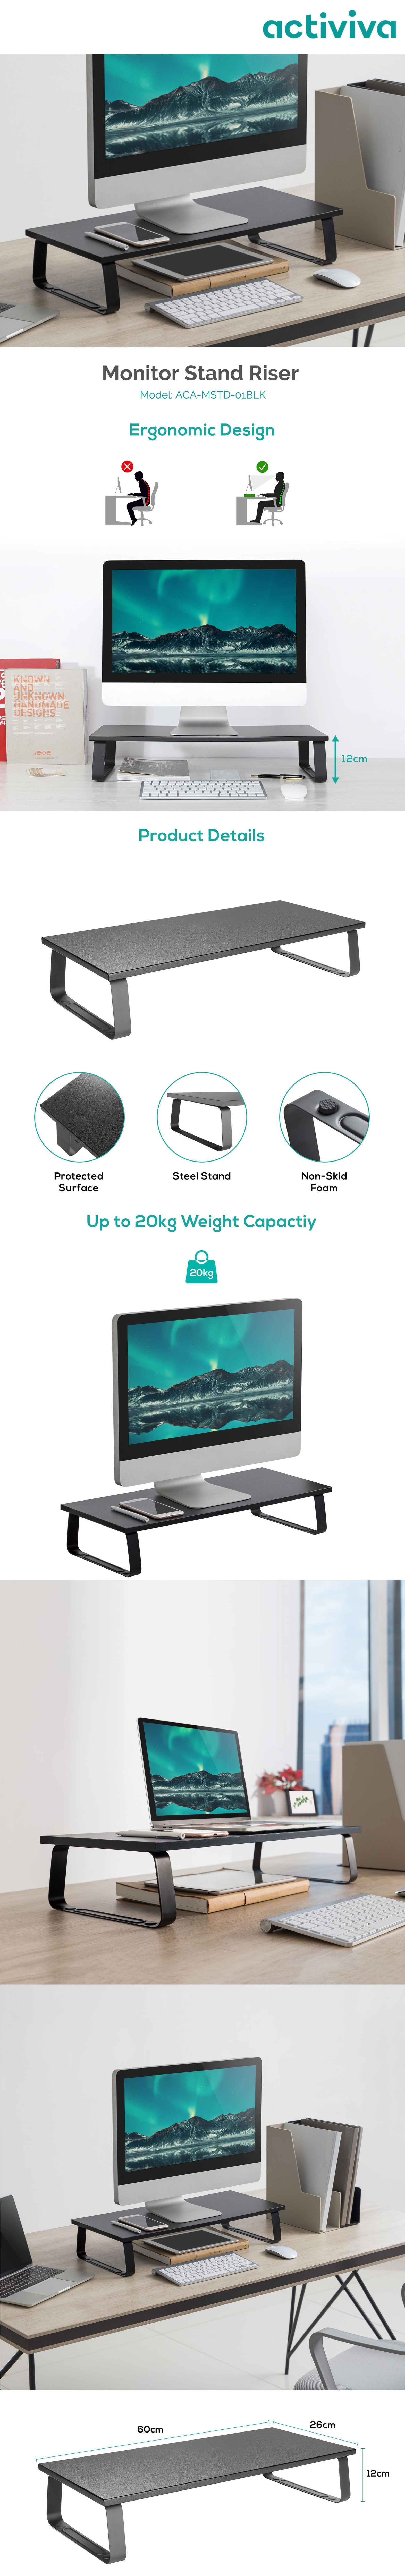 A large marketing image providing additional information about the product mbeat Activiva ErgoLife Monitor Stand Riser - Additional alt info not provided